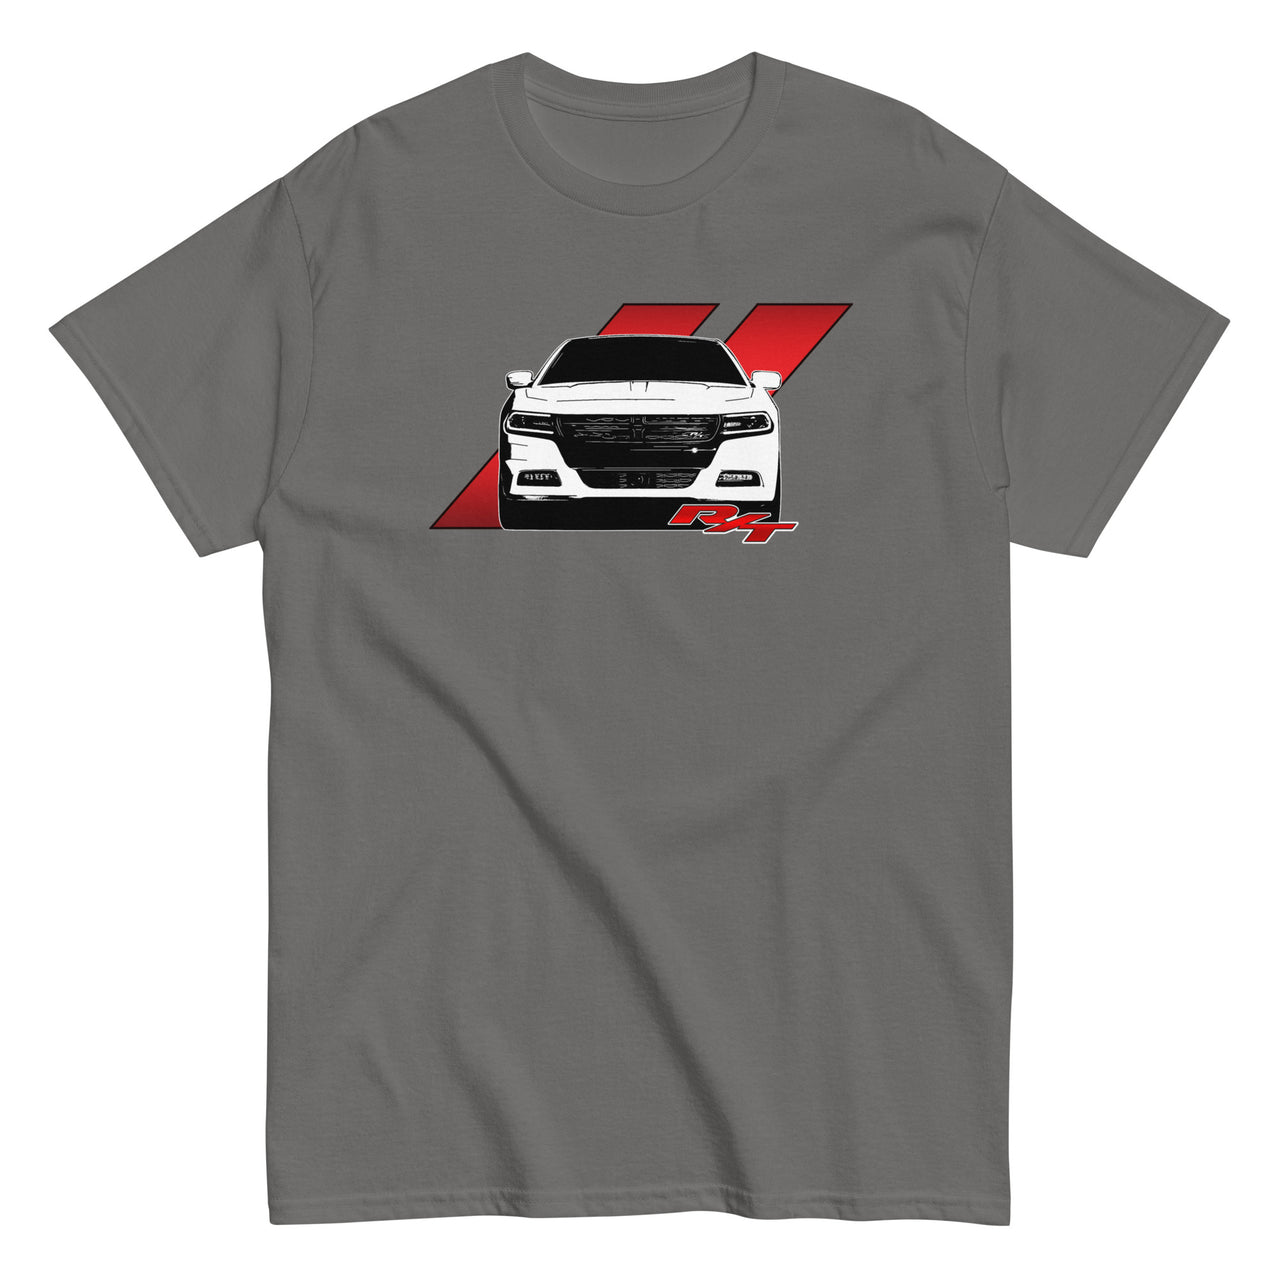 15-19 Charger R/T T-Shirt in charcoal